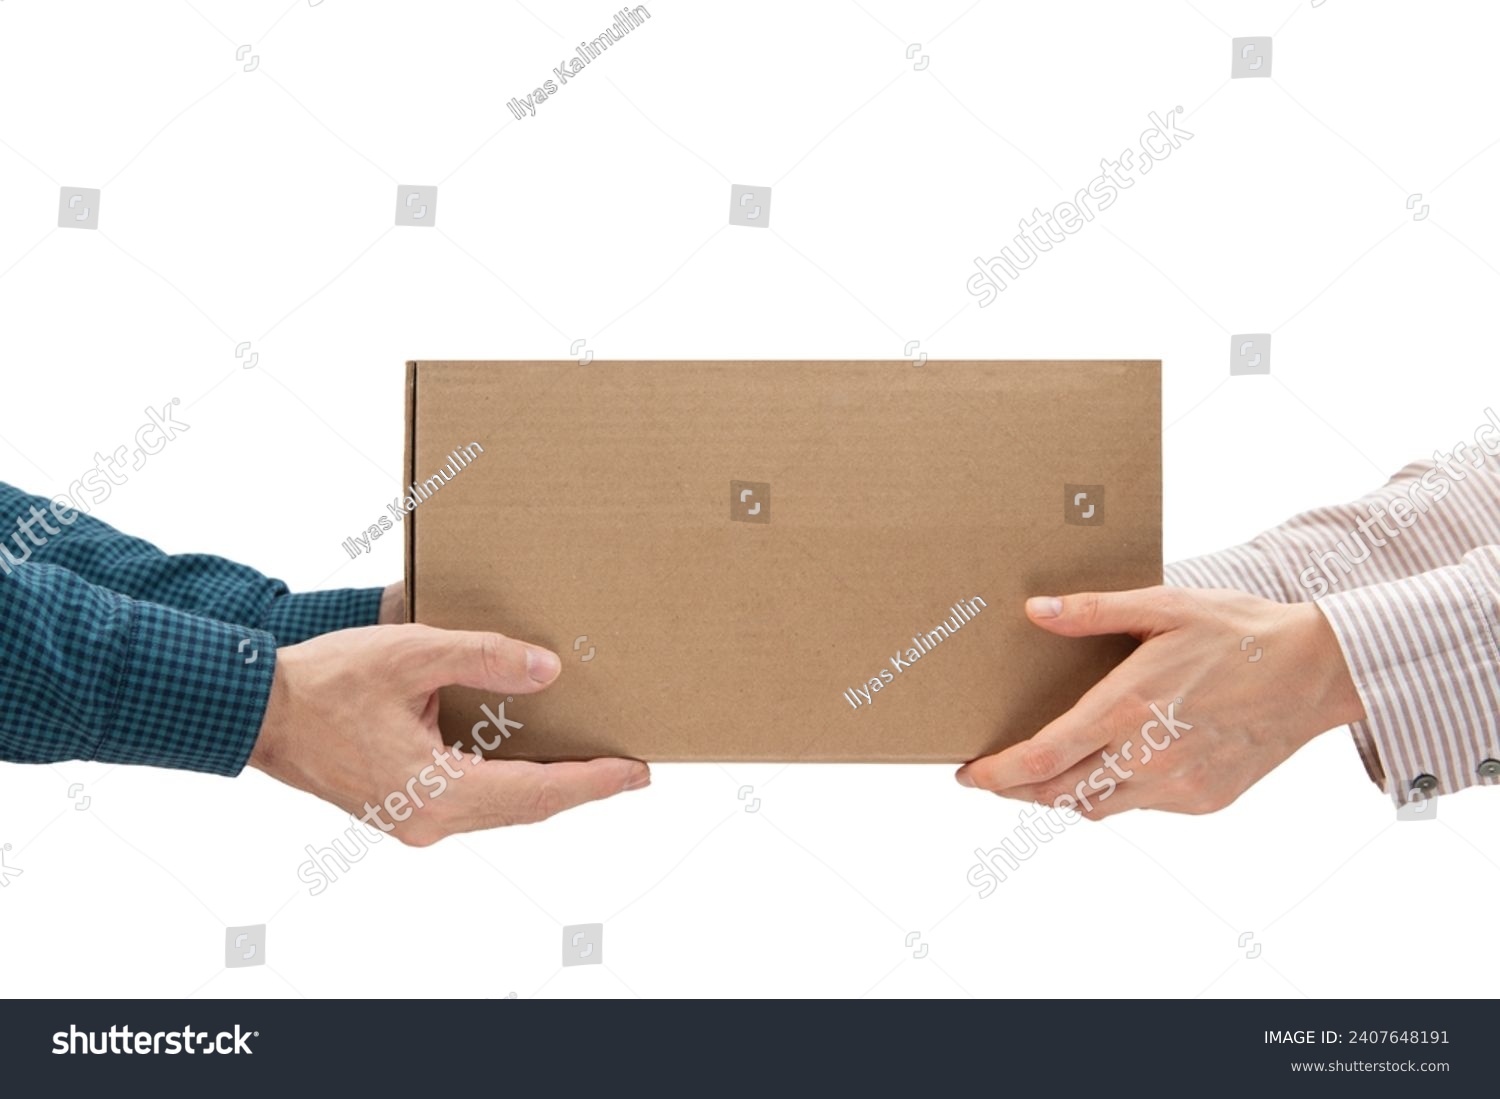 Male hands giving a package, female hands receiving a package. Purchase delivery concept #2407648191